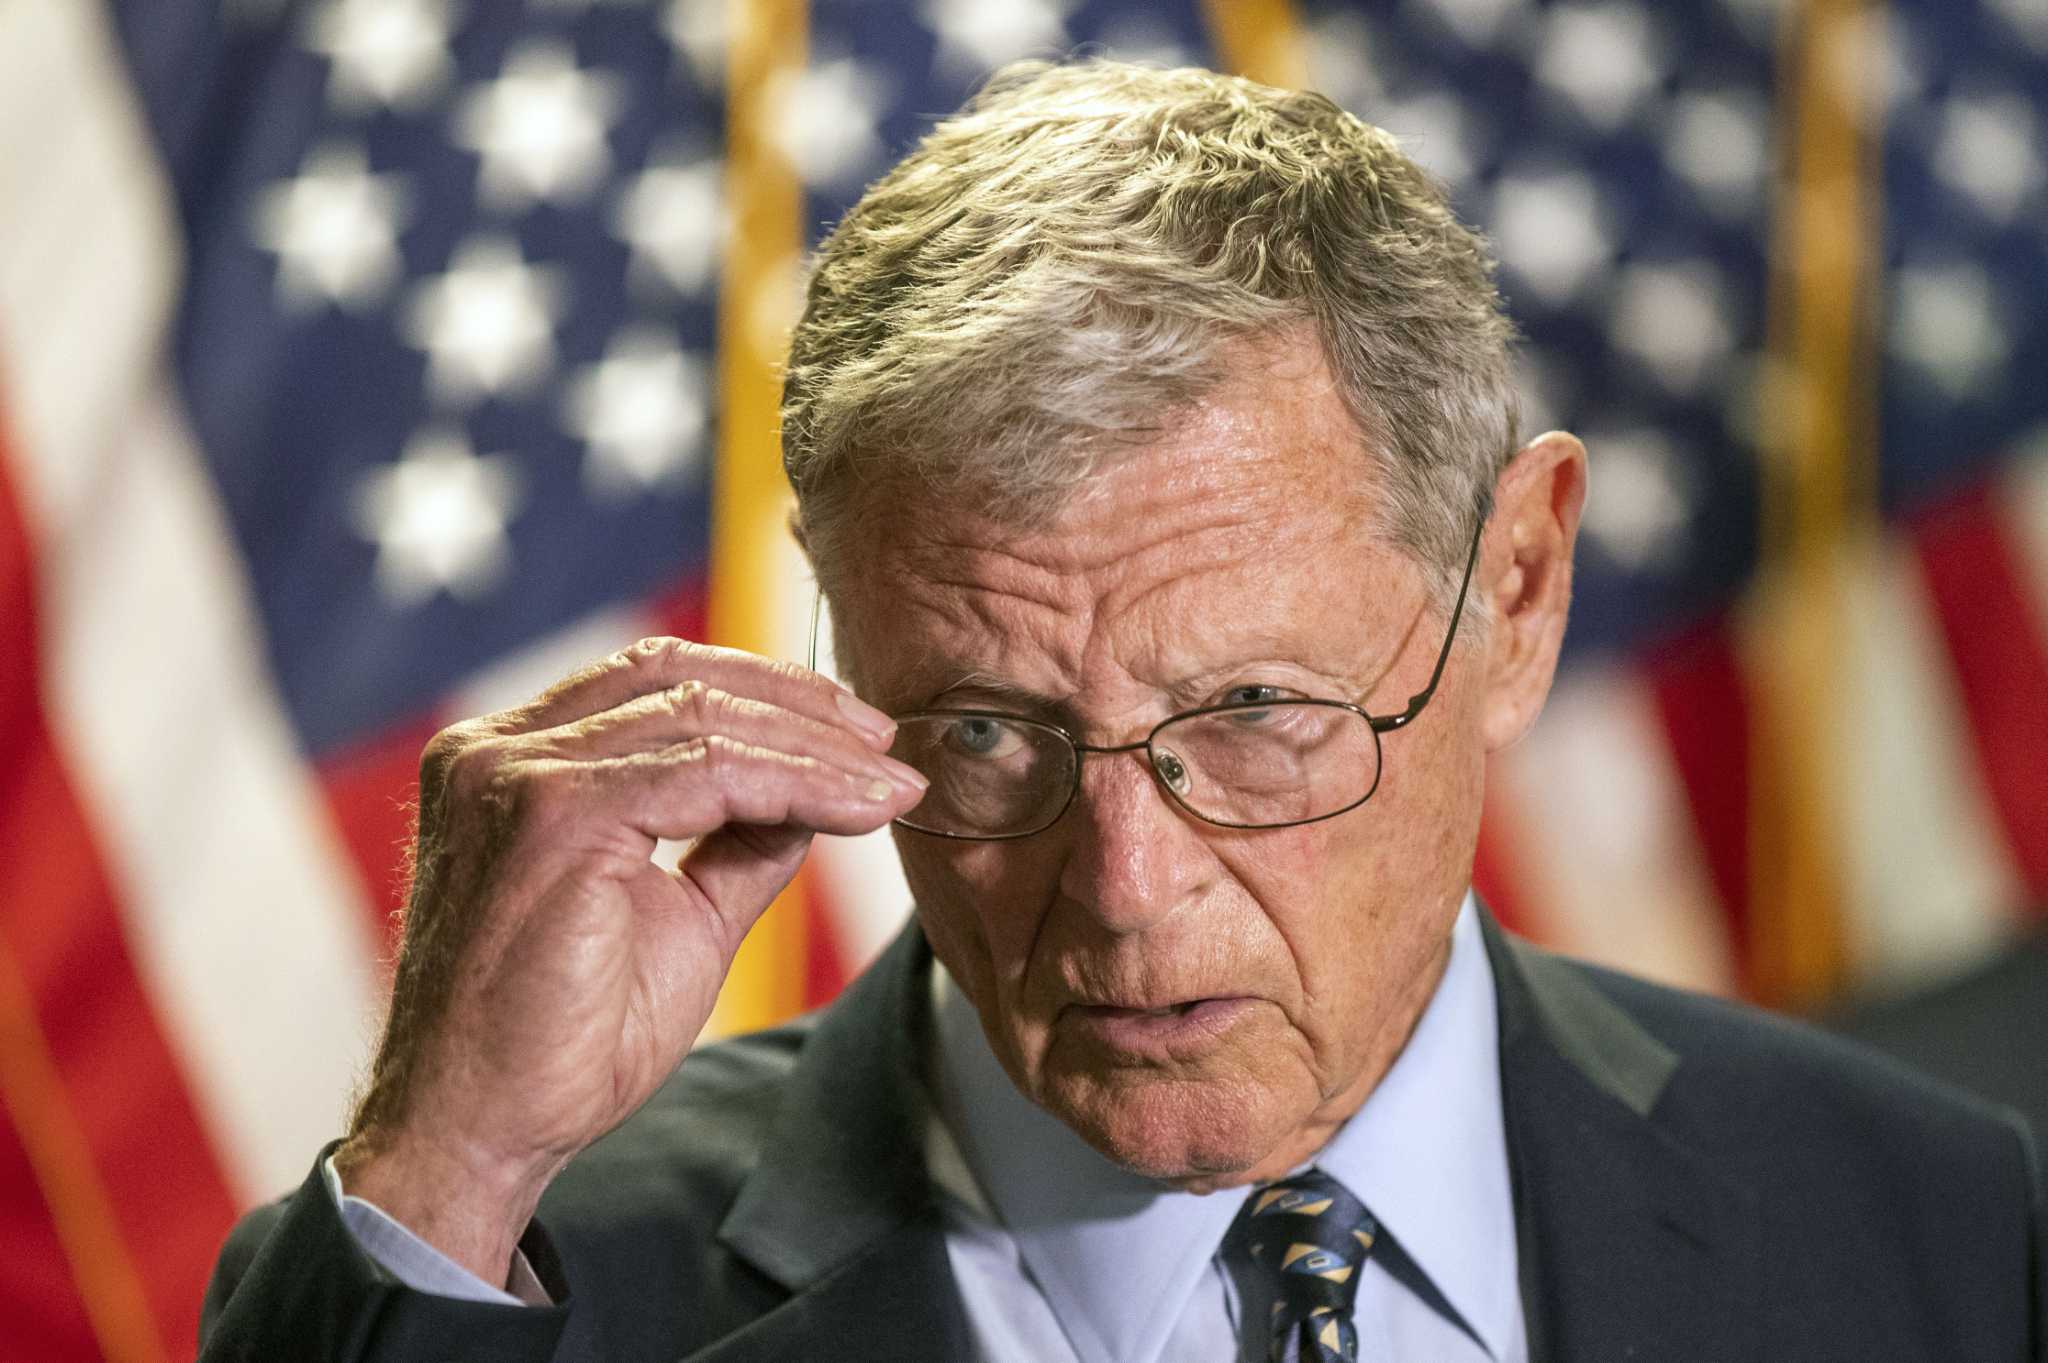 Former US Sen. Jim Inhofe, defense hawk who called human-caused climate change a 'hoax,' dies at 89